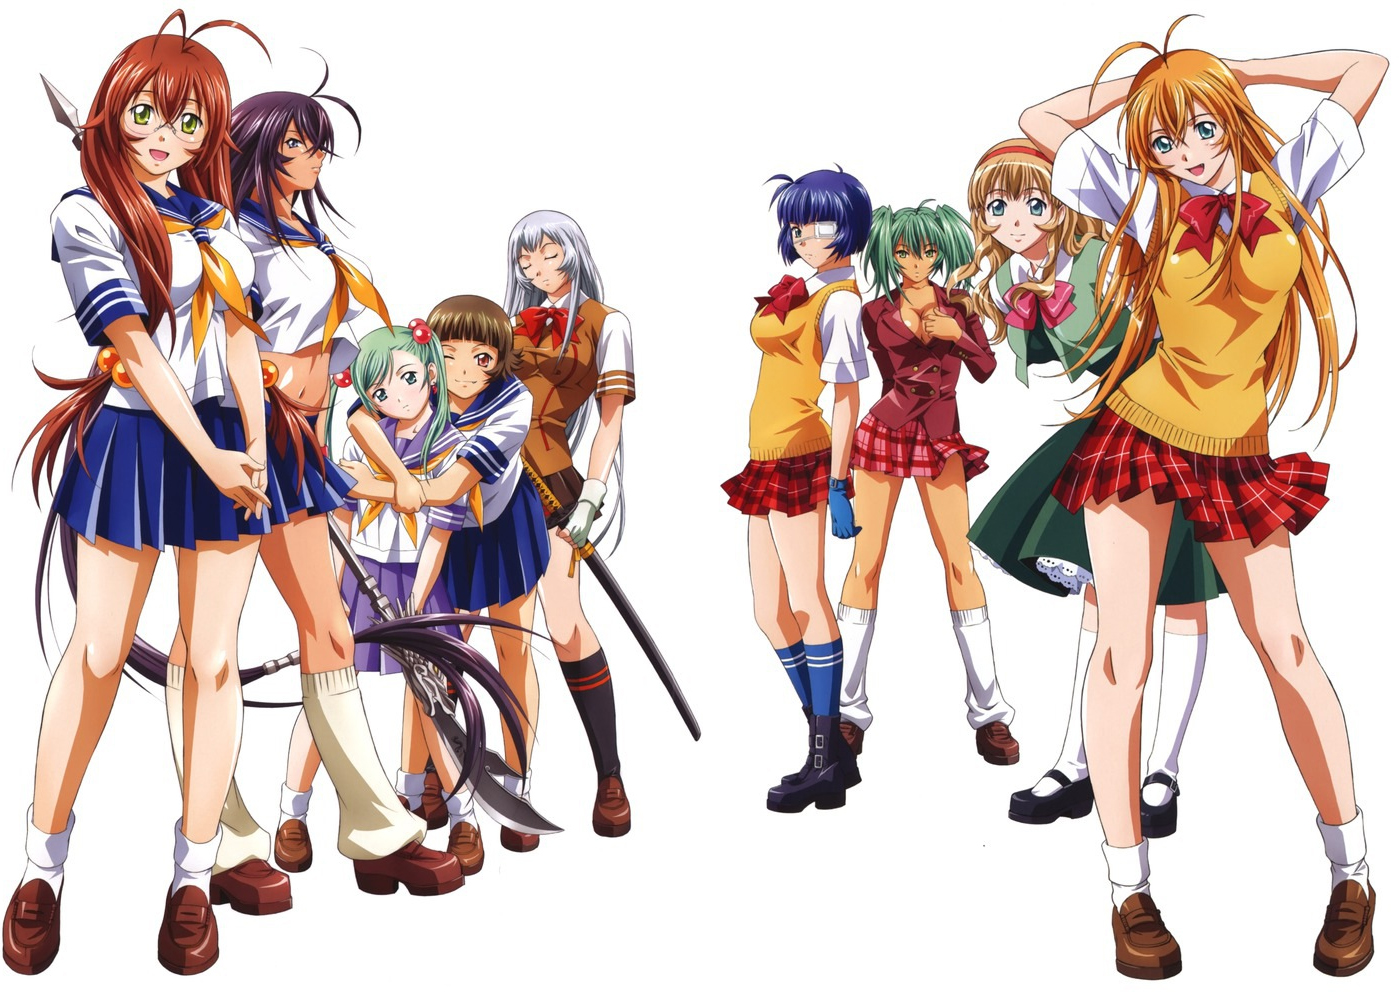 IKKI TOUSEN: WESTERN WOLVES Previews Theme Song In New Video